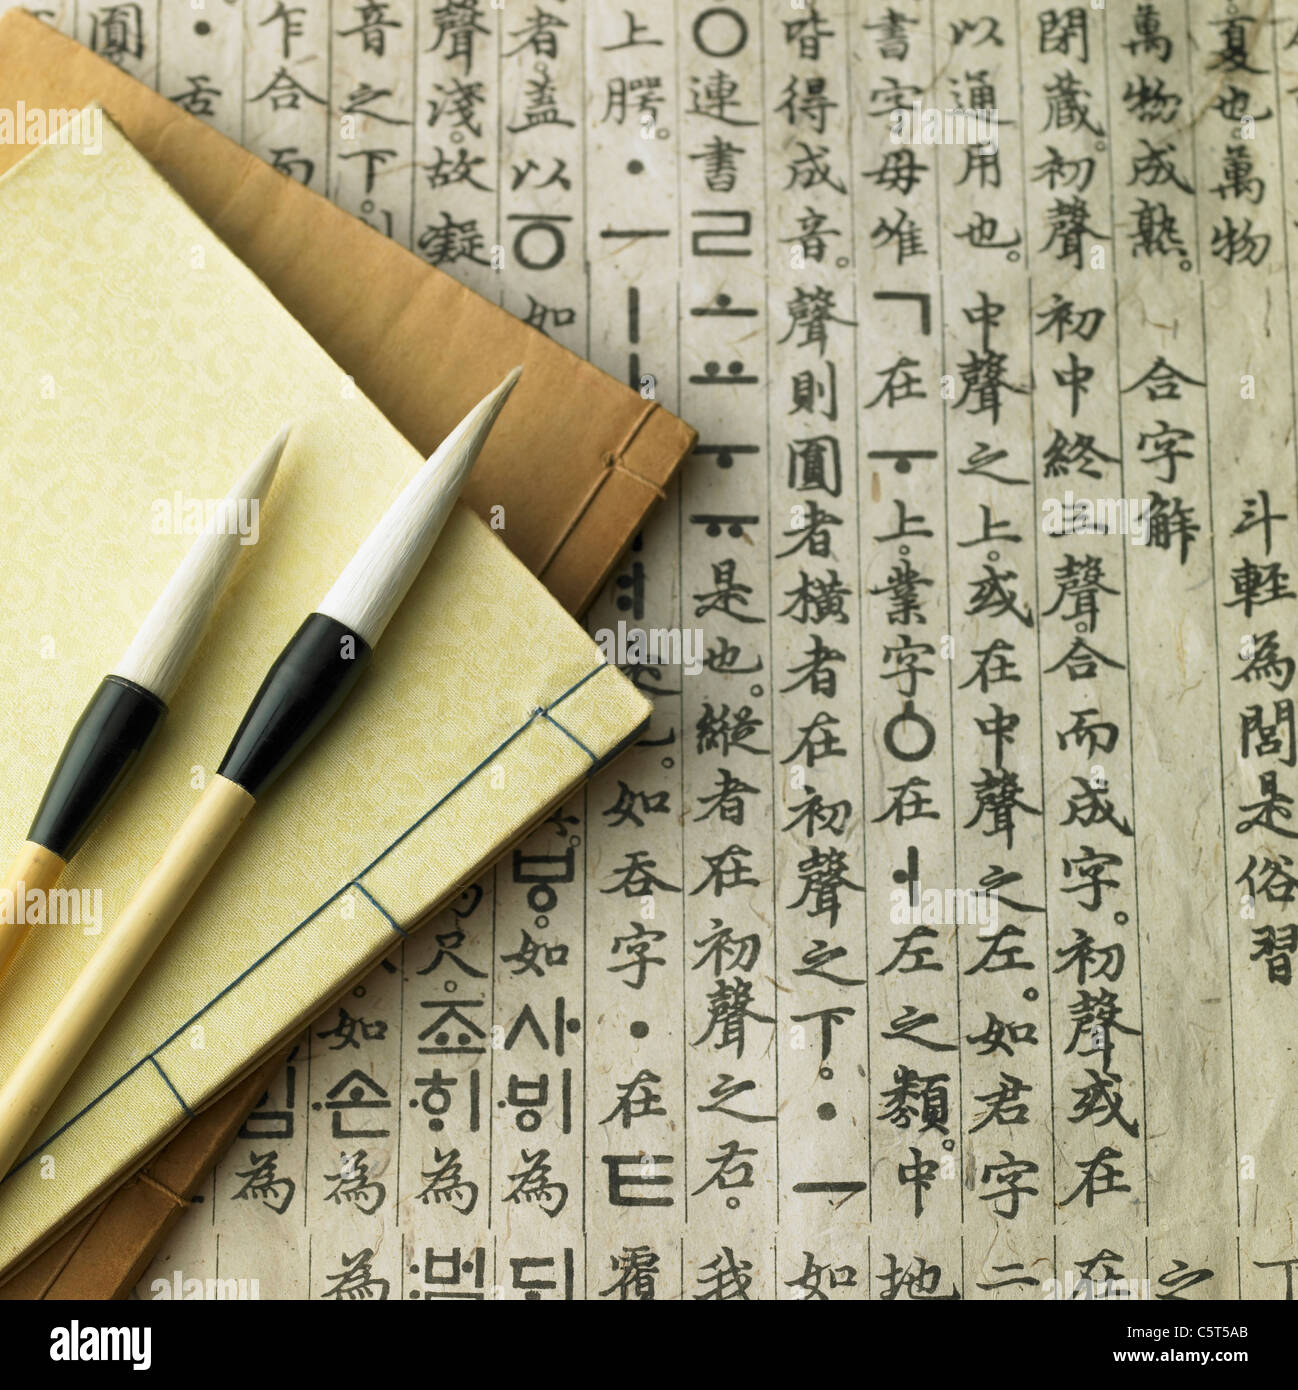 Korean traditional antique letters and books Stock Photo